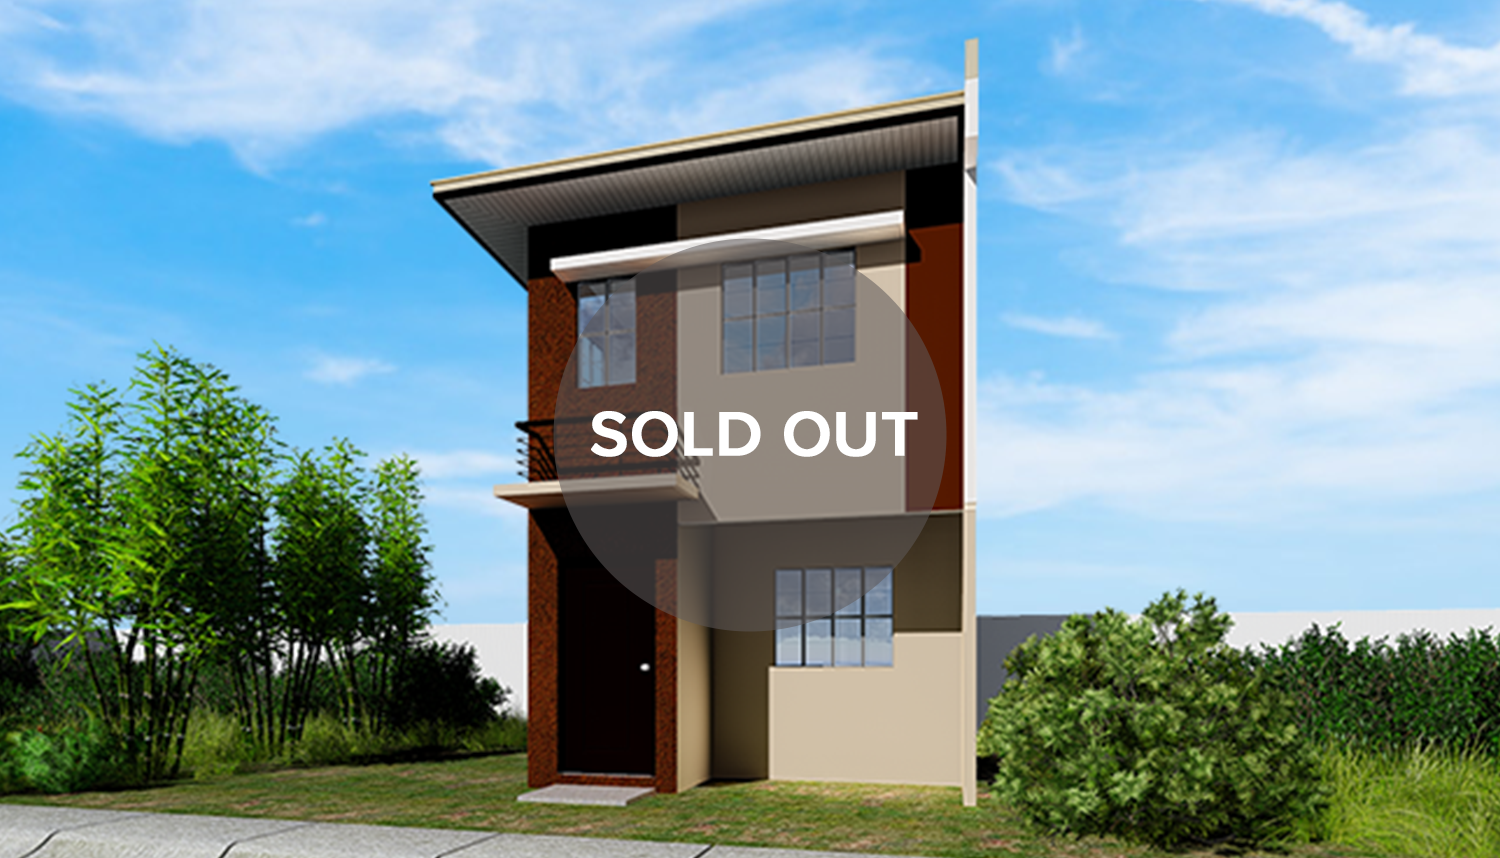 lumina angeli single firewall sold out | Affordable House and Lot For Sale In The Philippines